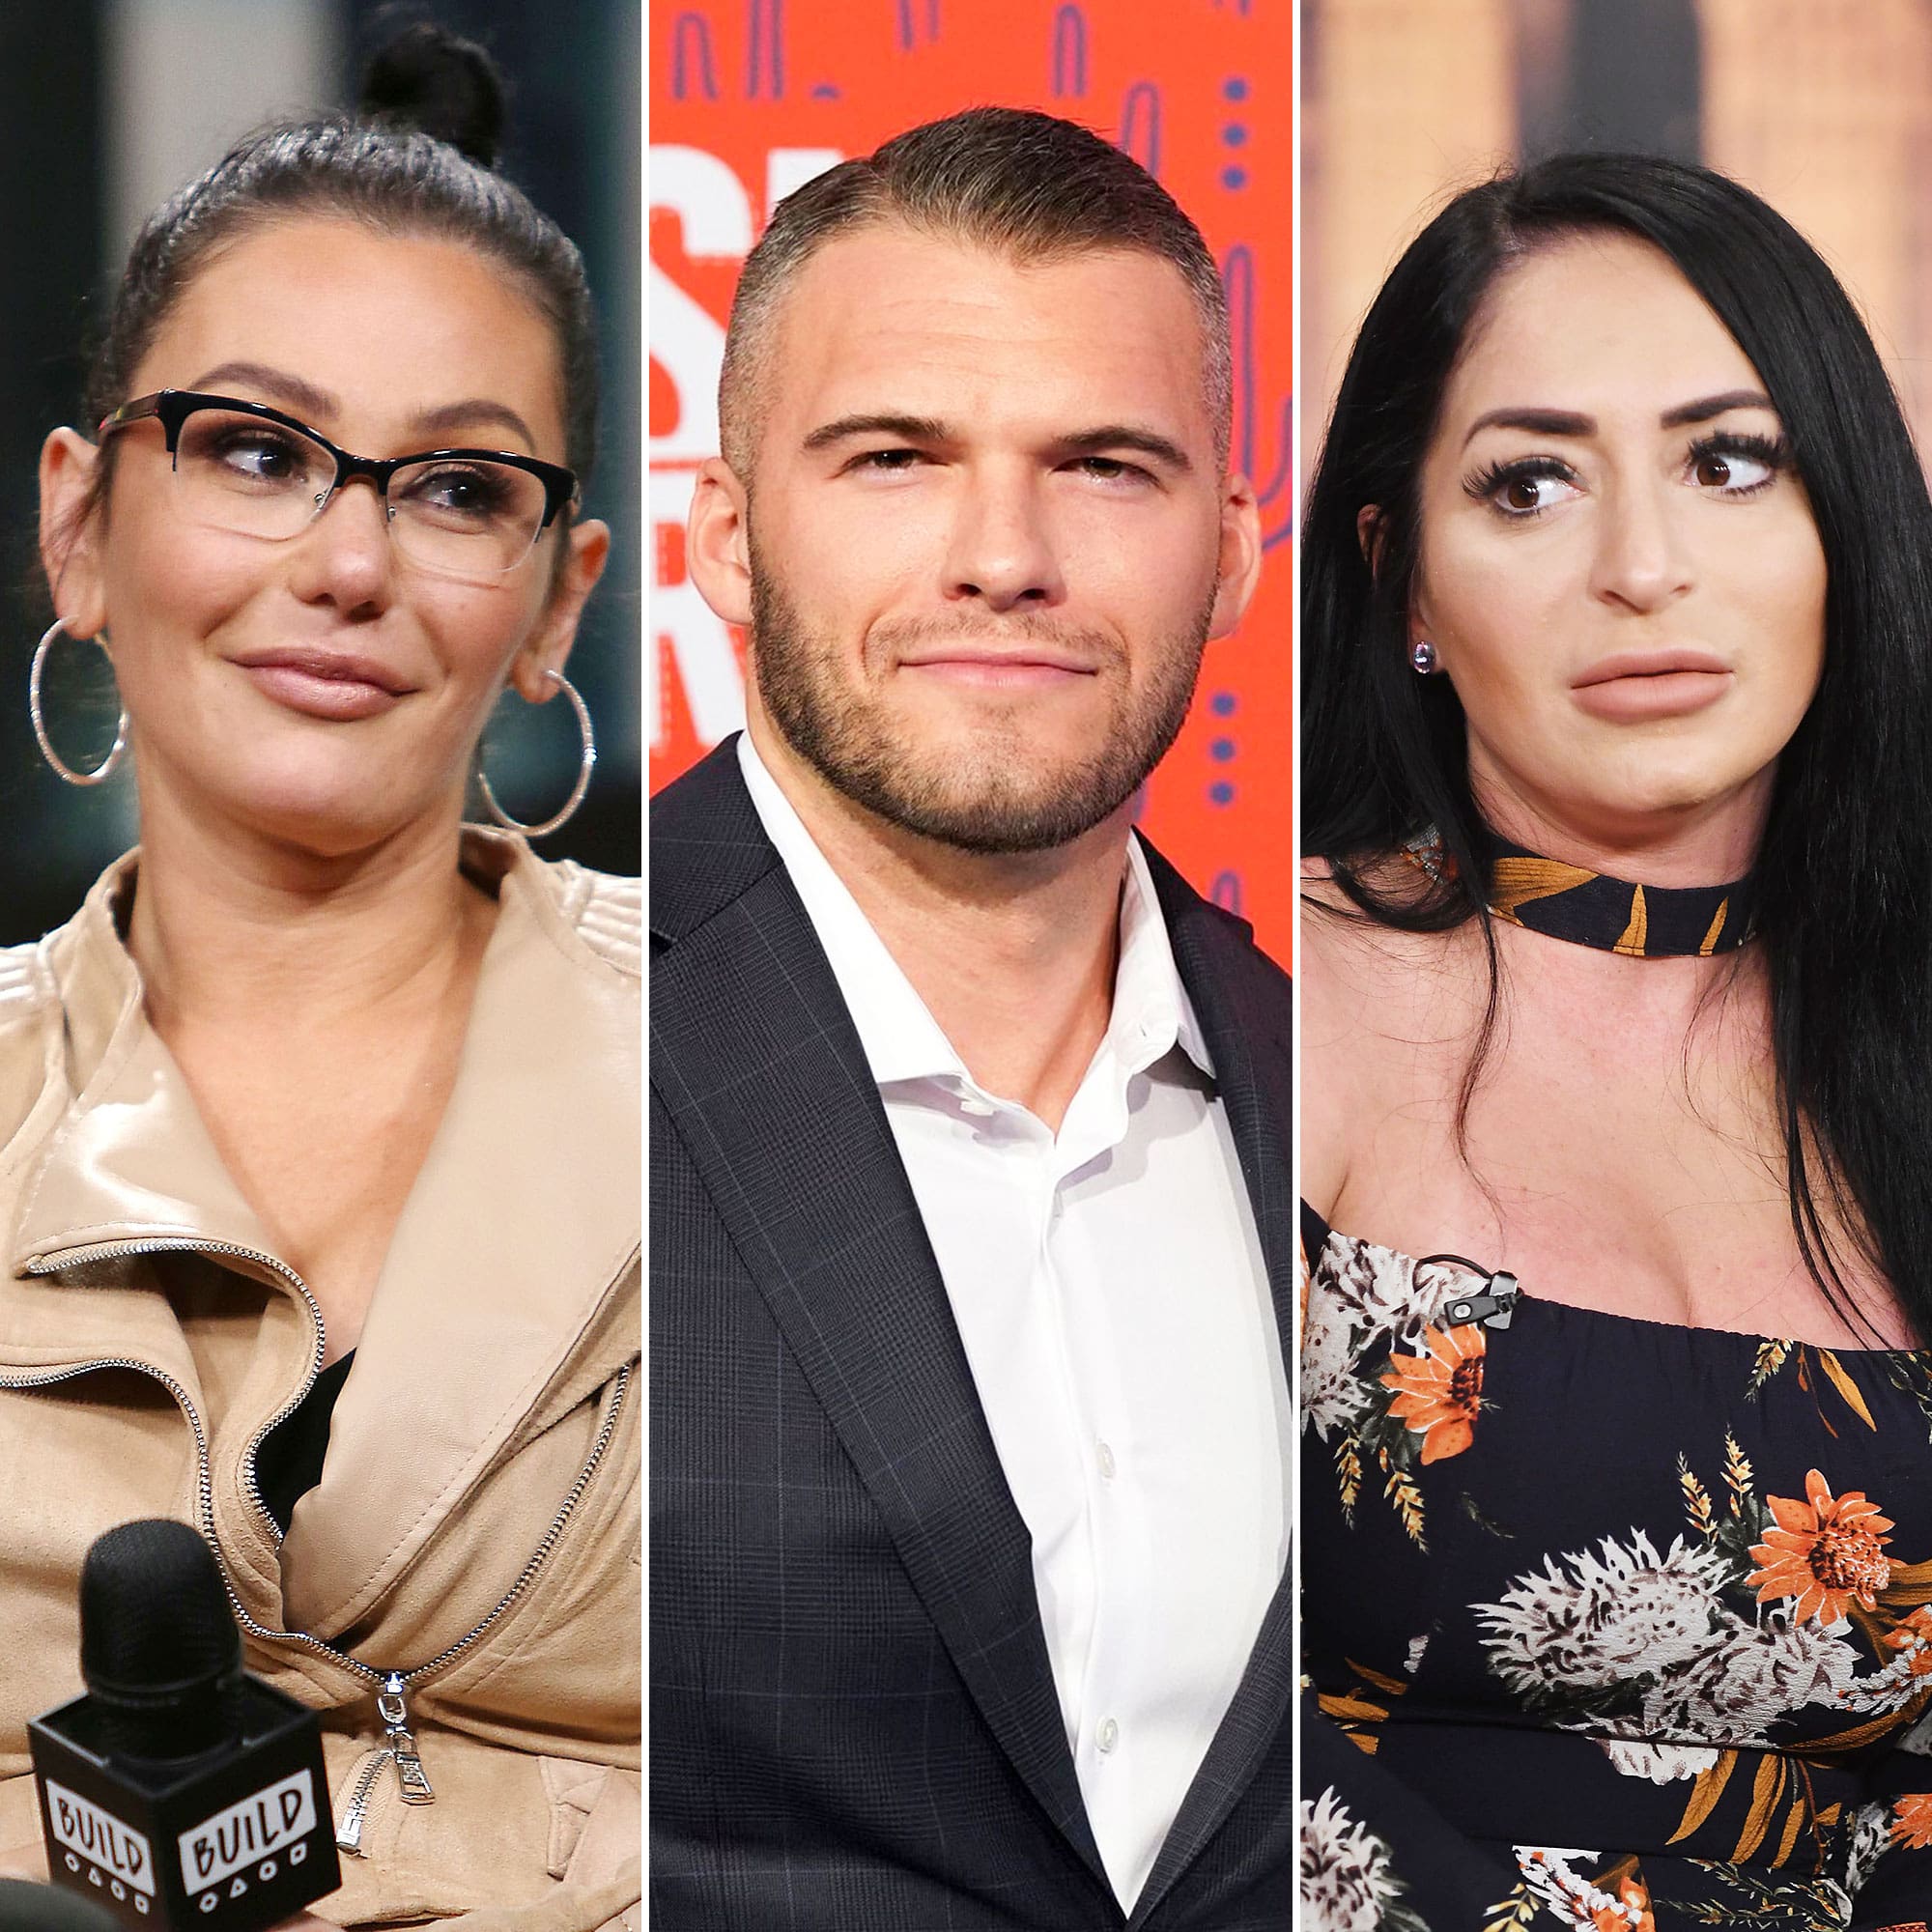 The latest drama on Jersey Shore Family Vacation surrounds JWoww and Zack C...